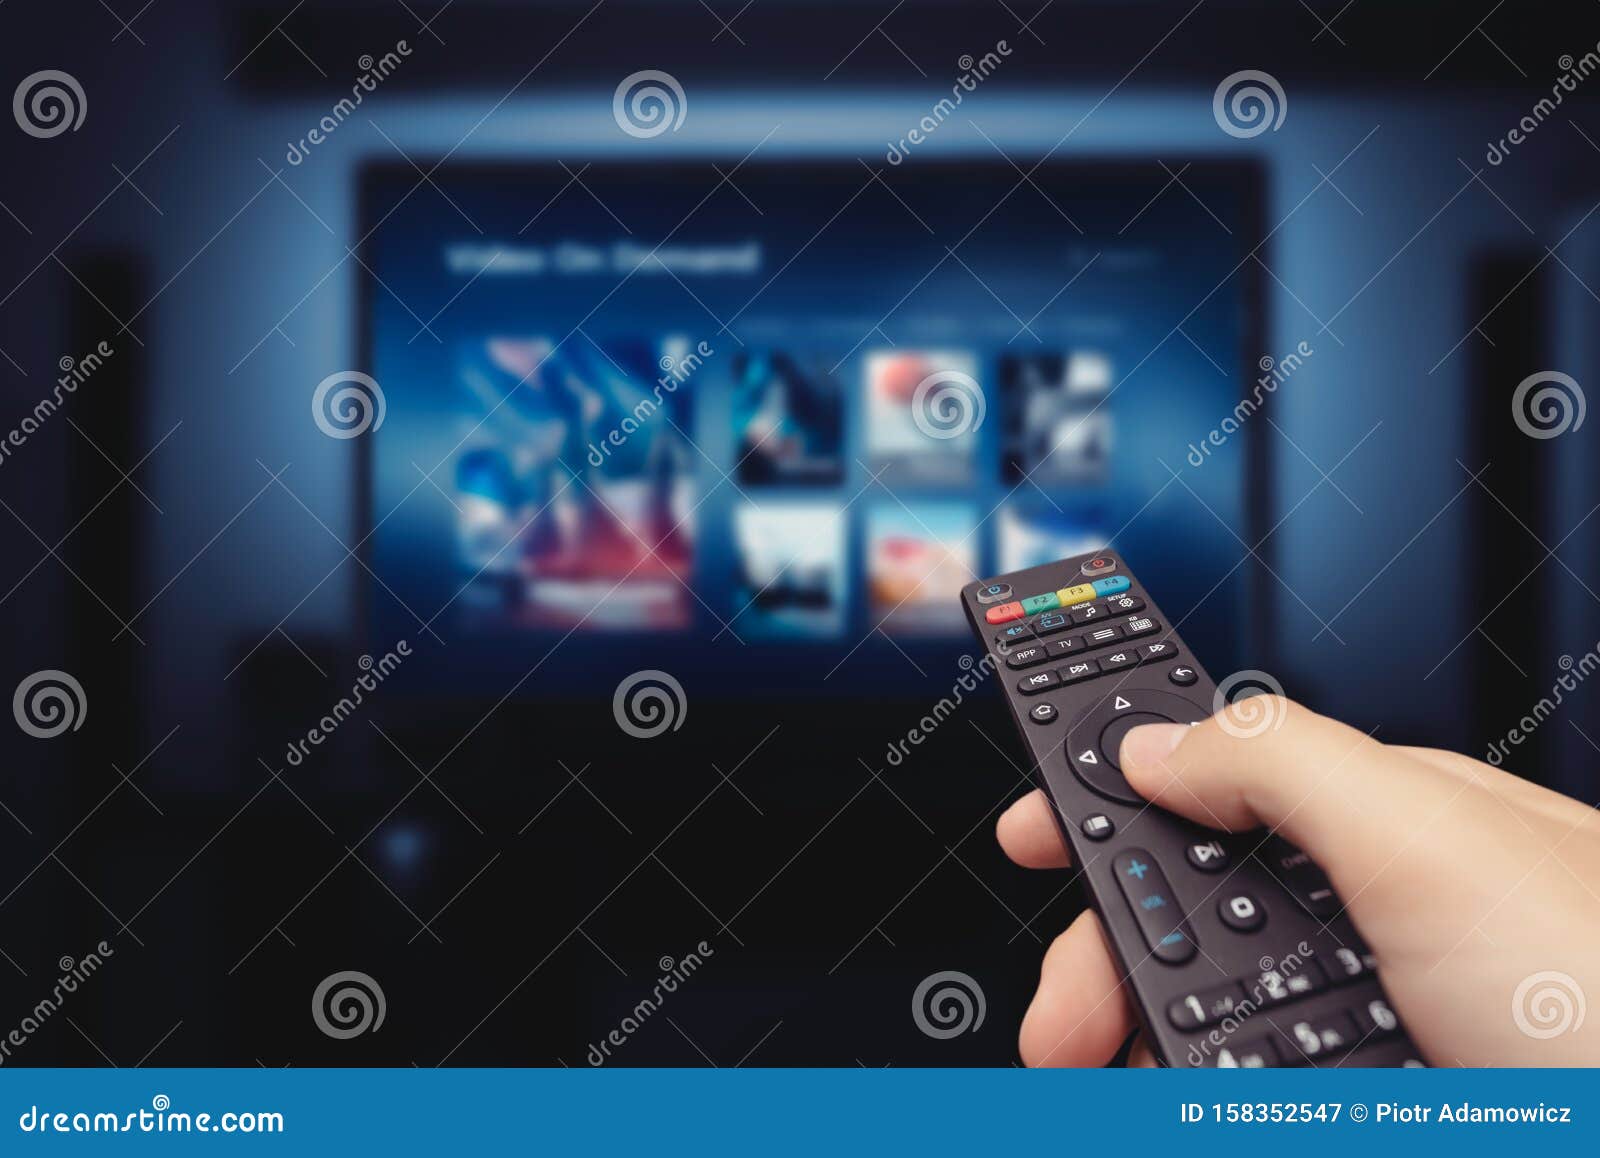 VOD Service Screen with Remote Control in Hand Stock Image